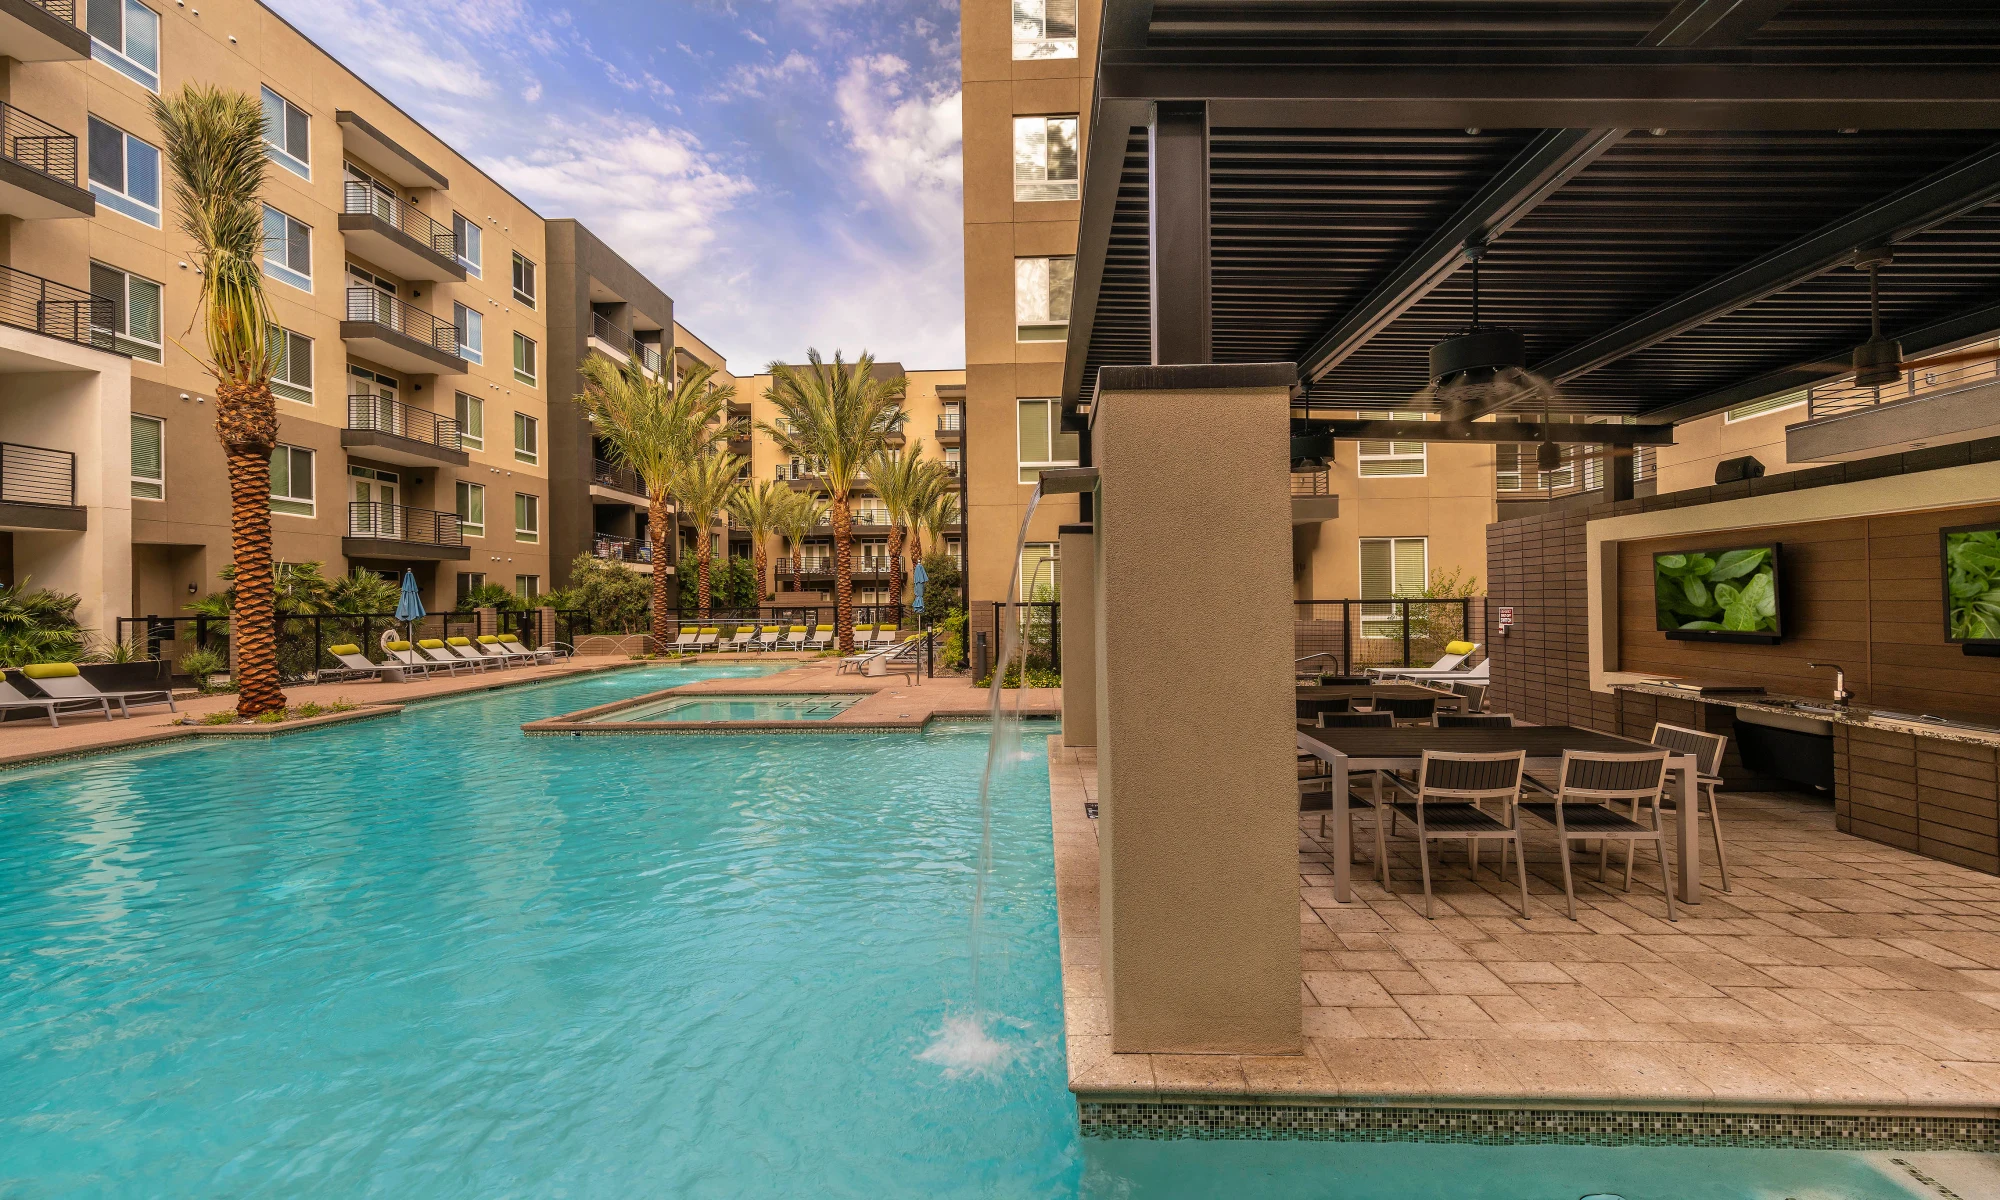 old town scottsdale apartments